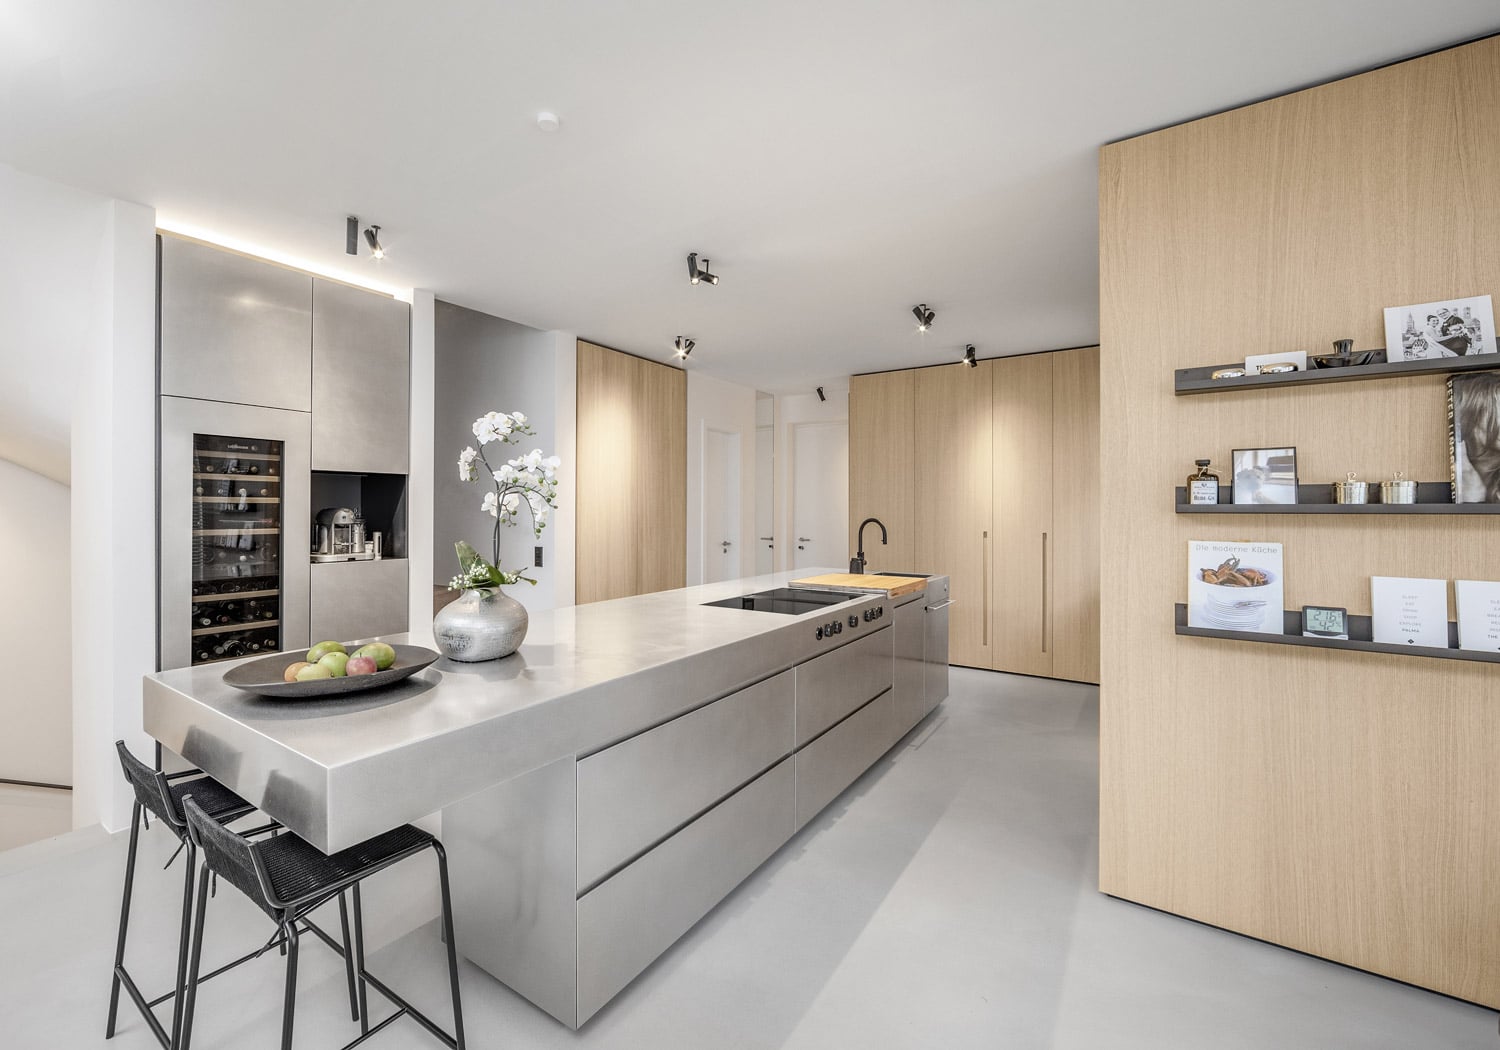 A luxury kitchen design curated even in the most minute details, to give the space a strong metropolitan identity and a functional flow that would fit the client’s way of living in it.